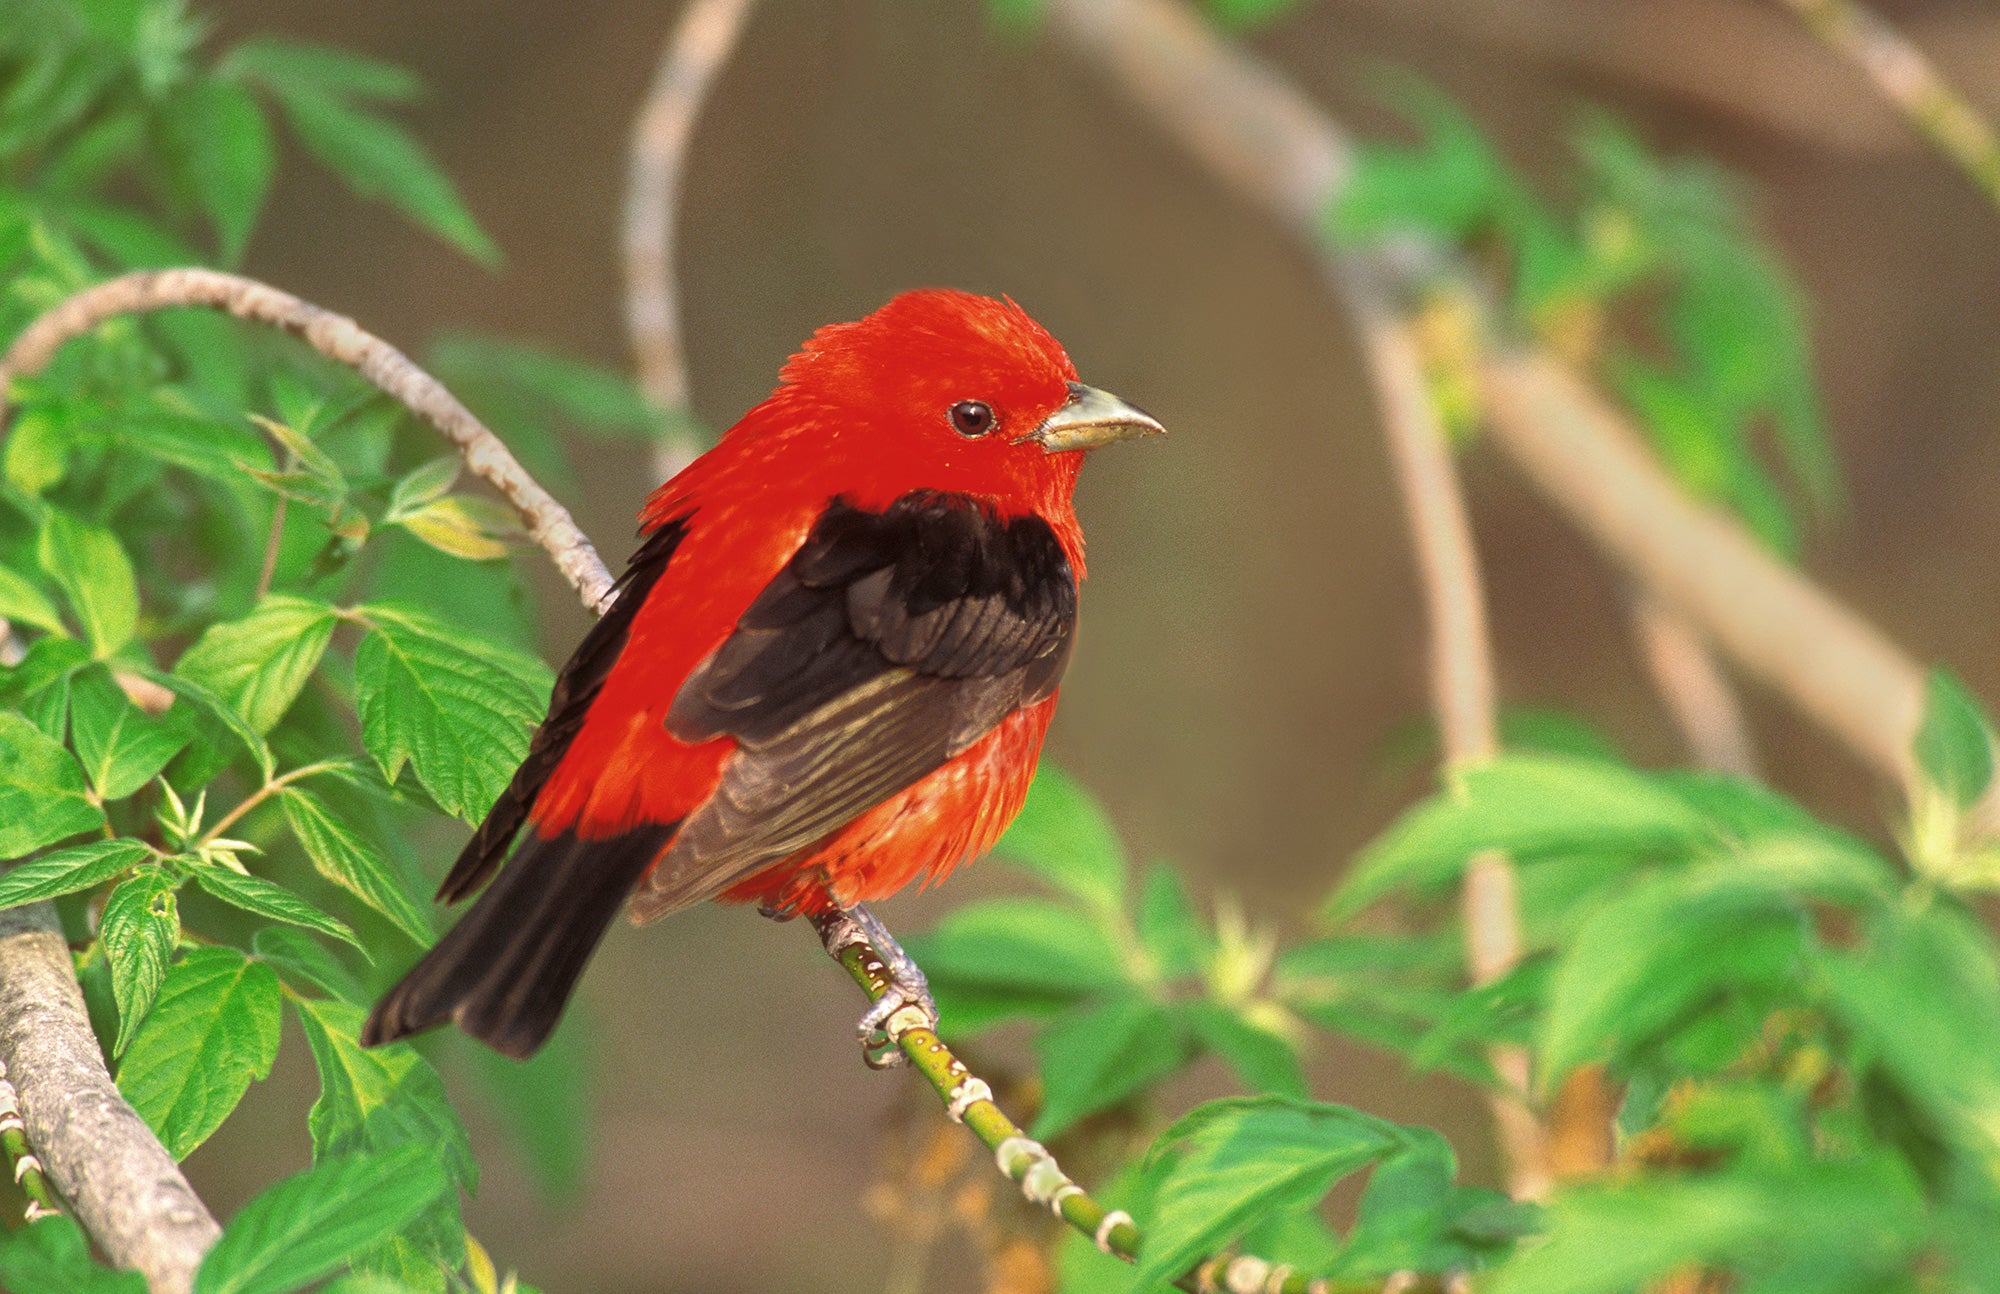 A scarlet tanager perched on a tree. End of image description.